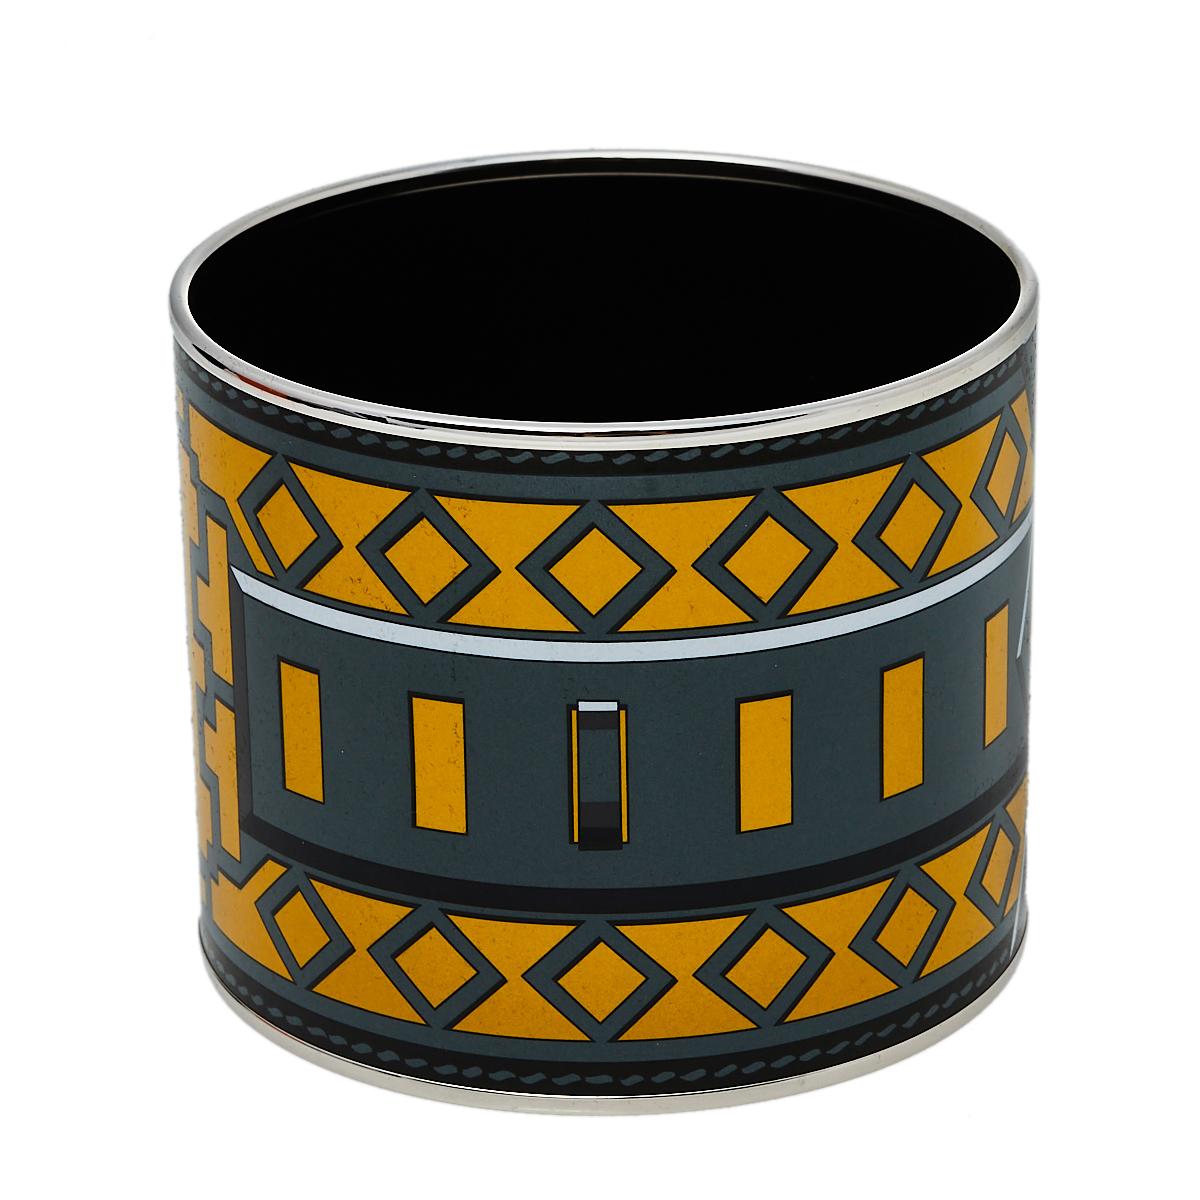 Hermes presents this stylish and chic enamel bracelet. It features a print throughout inspired by the house's iconic Collier De Chien bracelet. Hallmark details on the inside bring this creation to completion.

